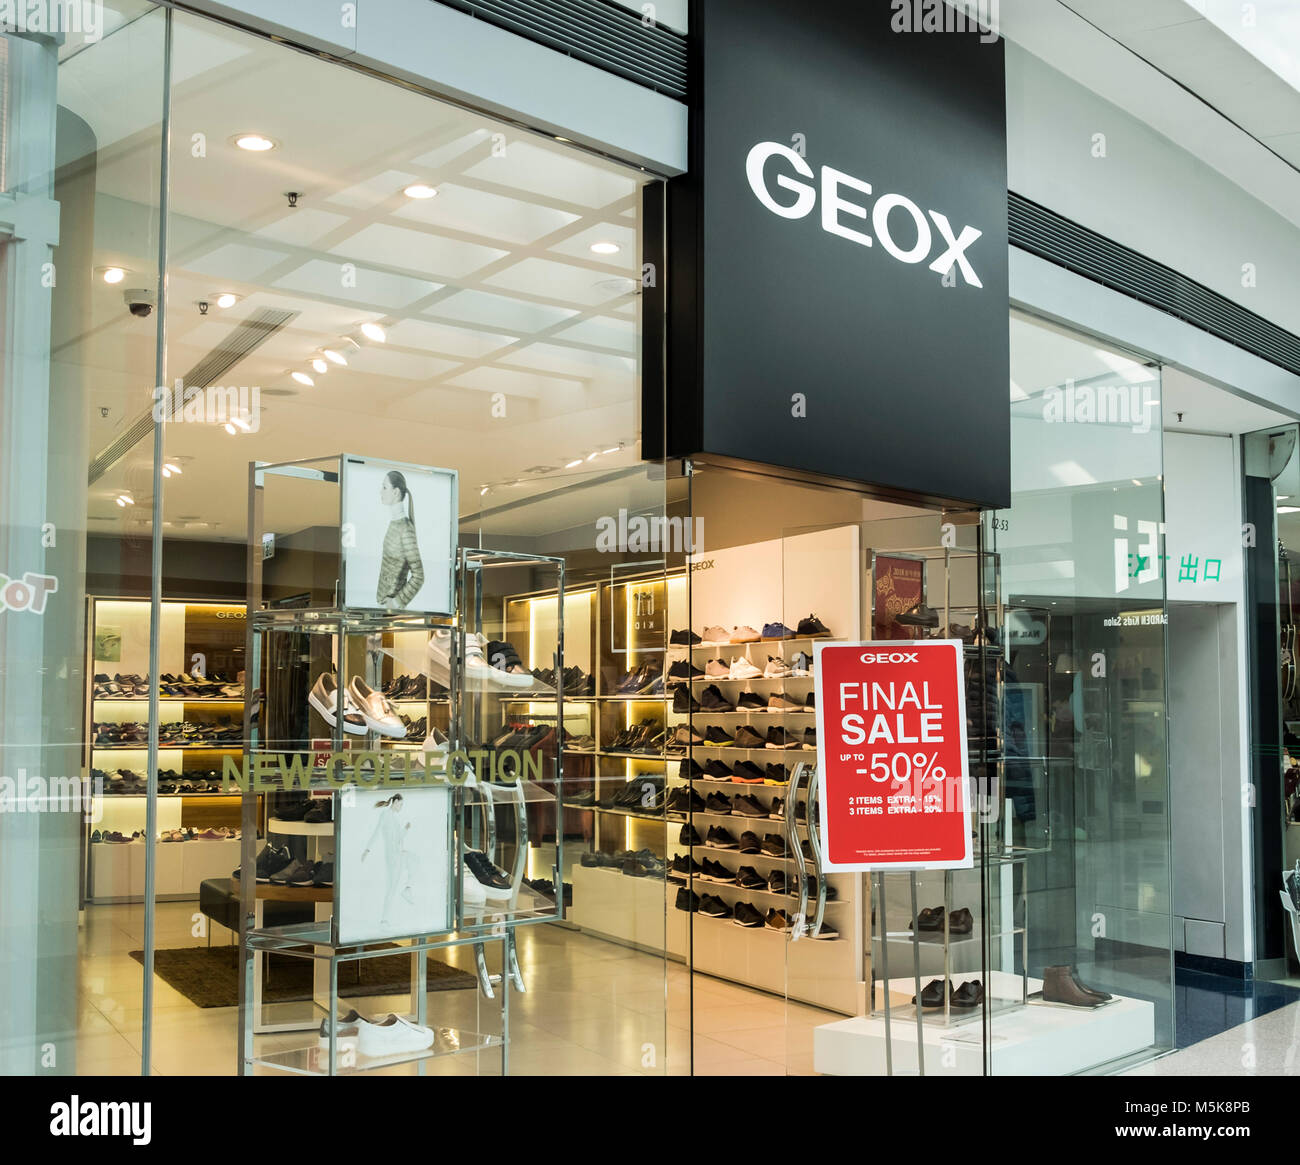 Geox Store High Resolution Stock 